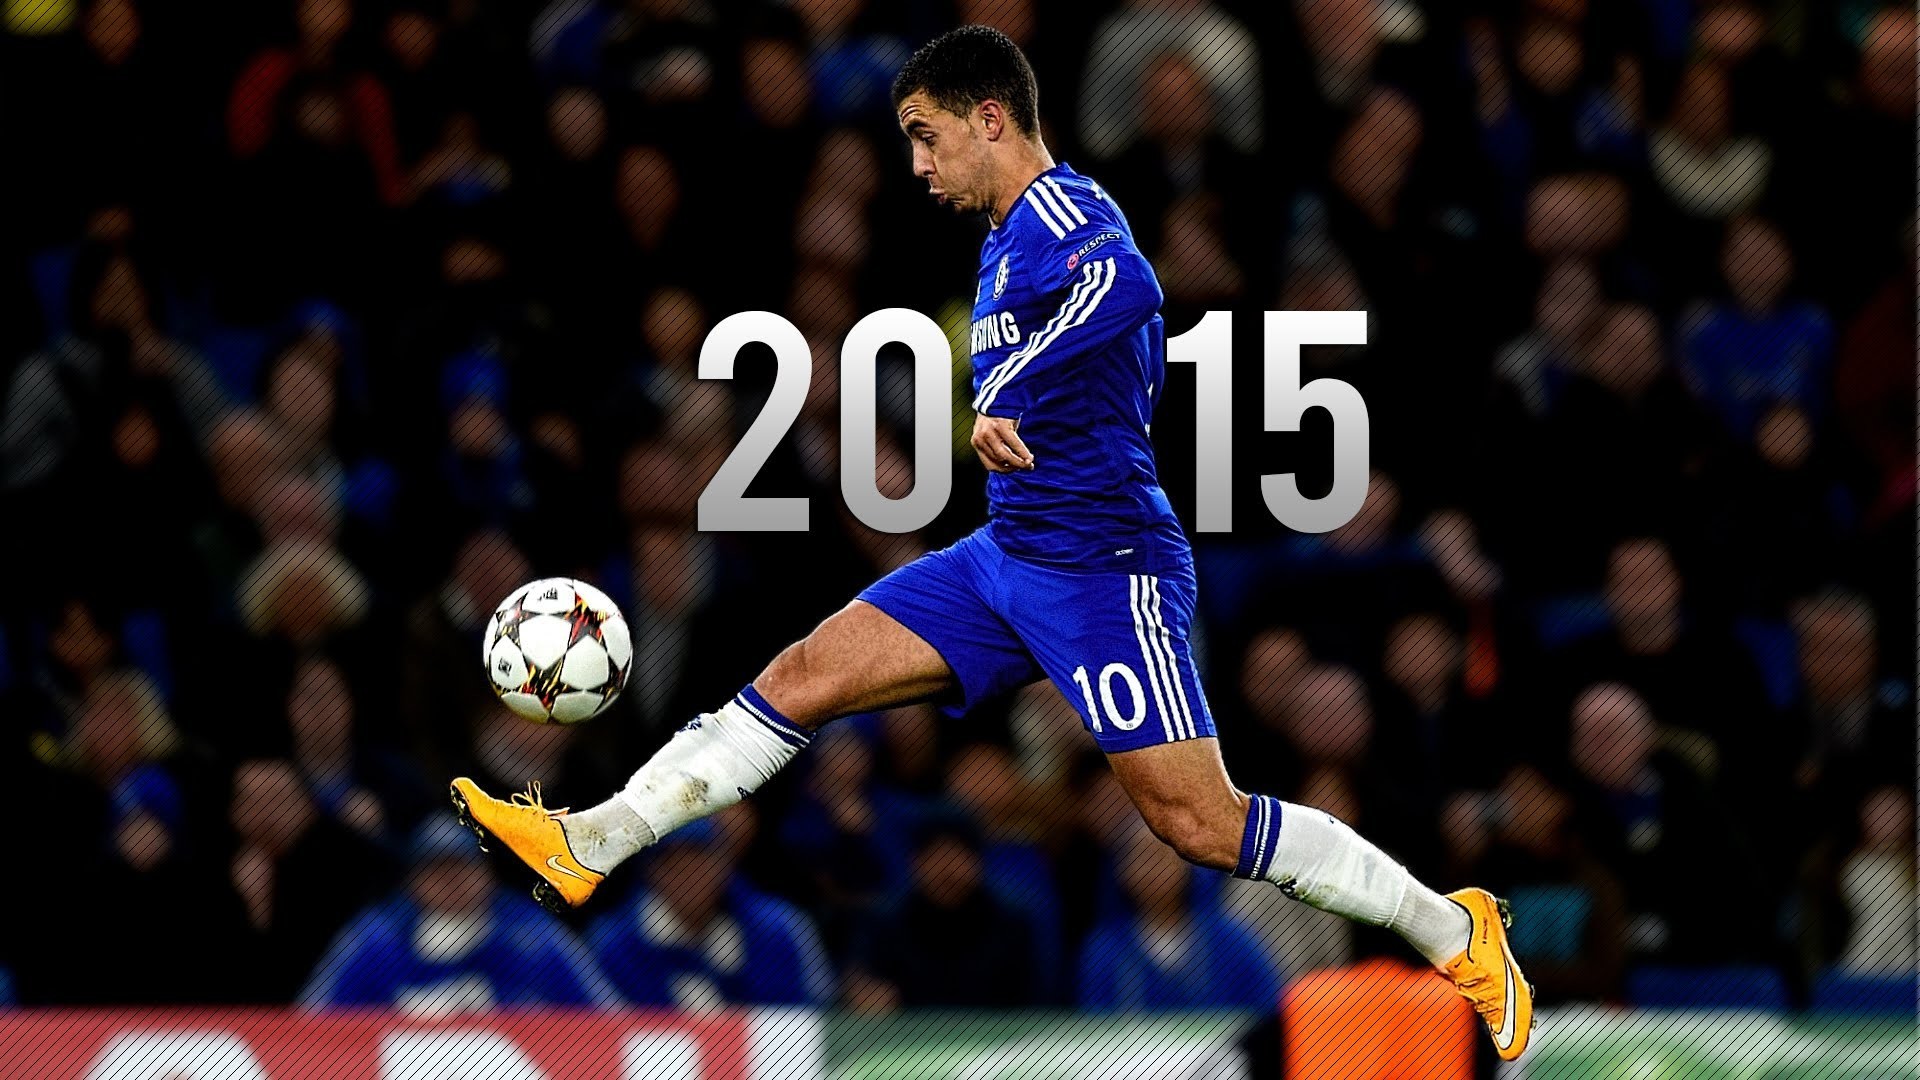 Chelsea HD Wallpapers 1080p (75+ images)